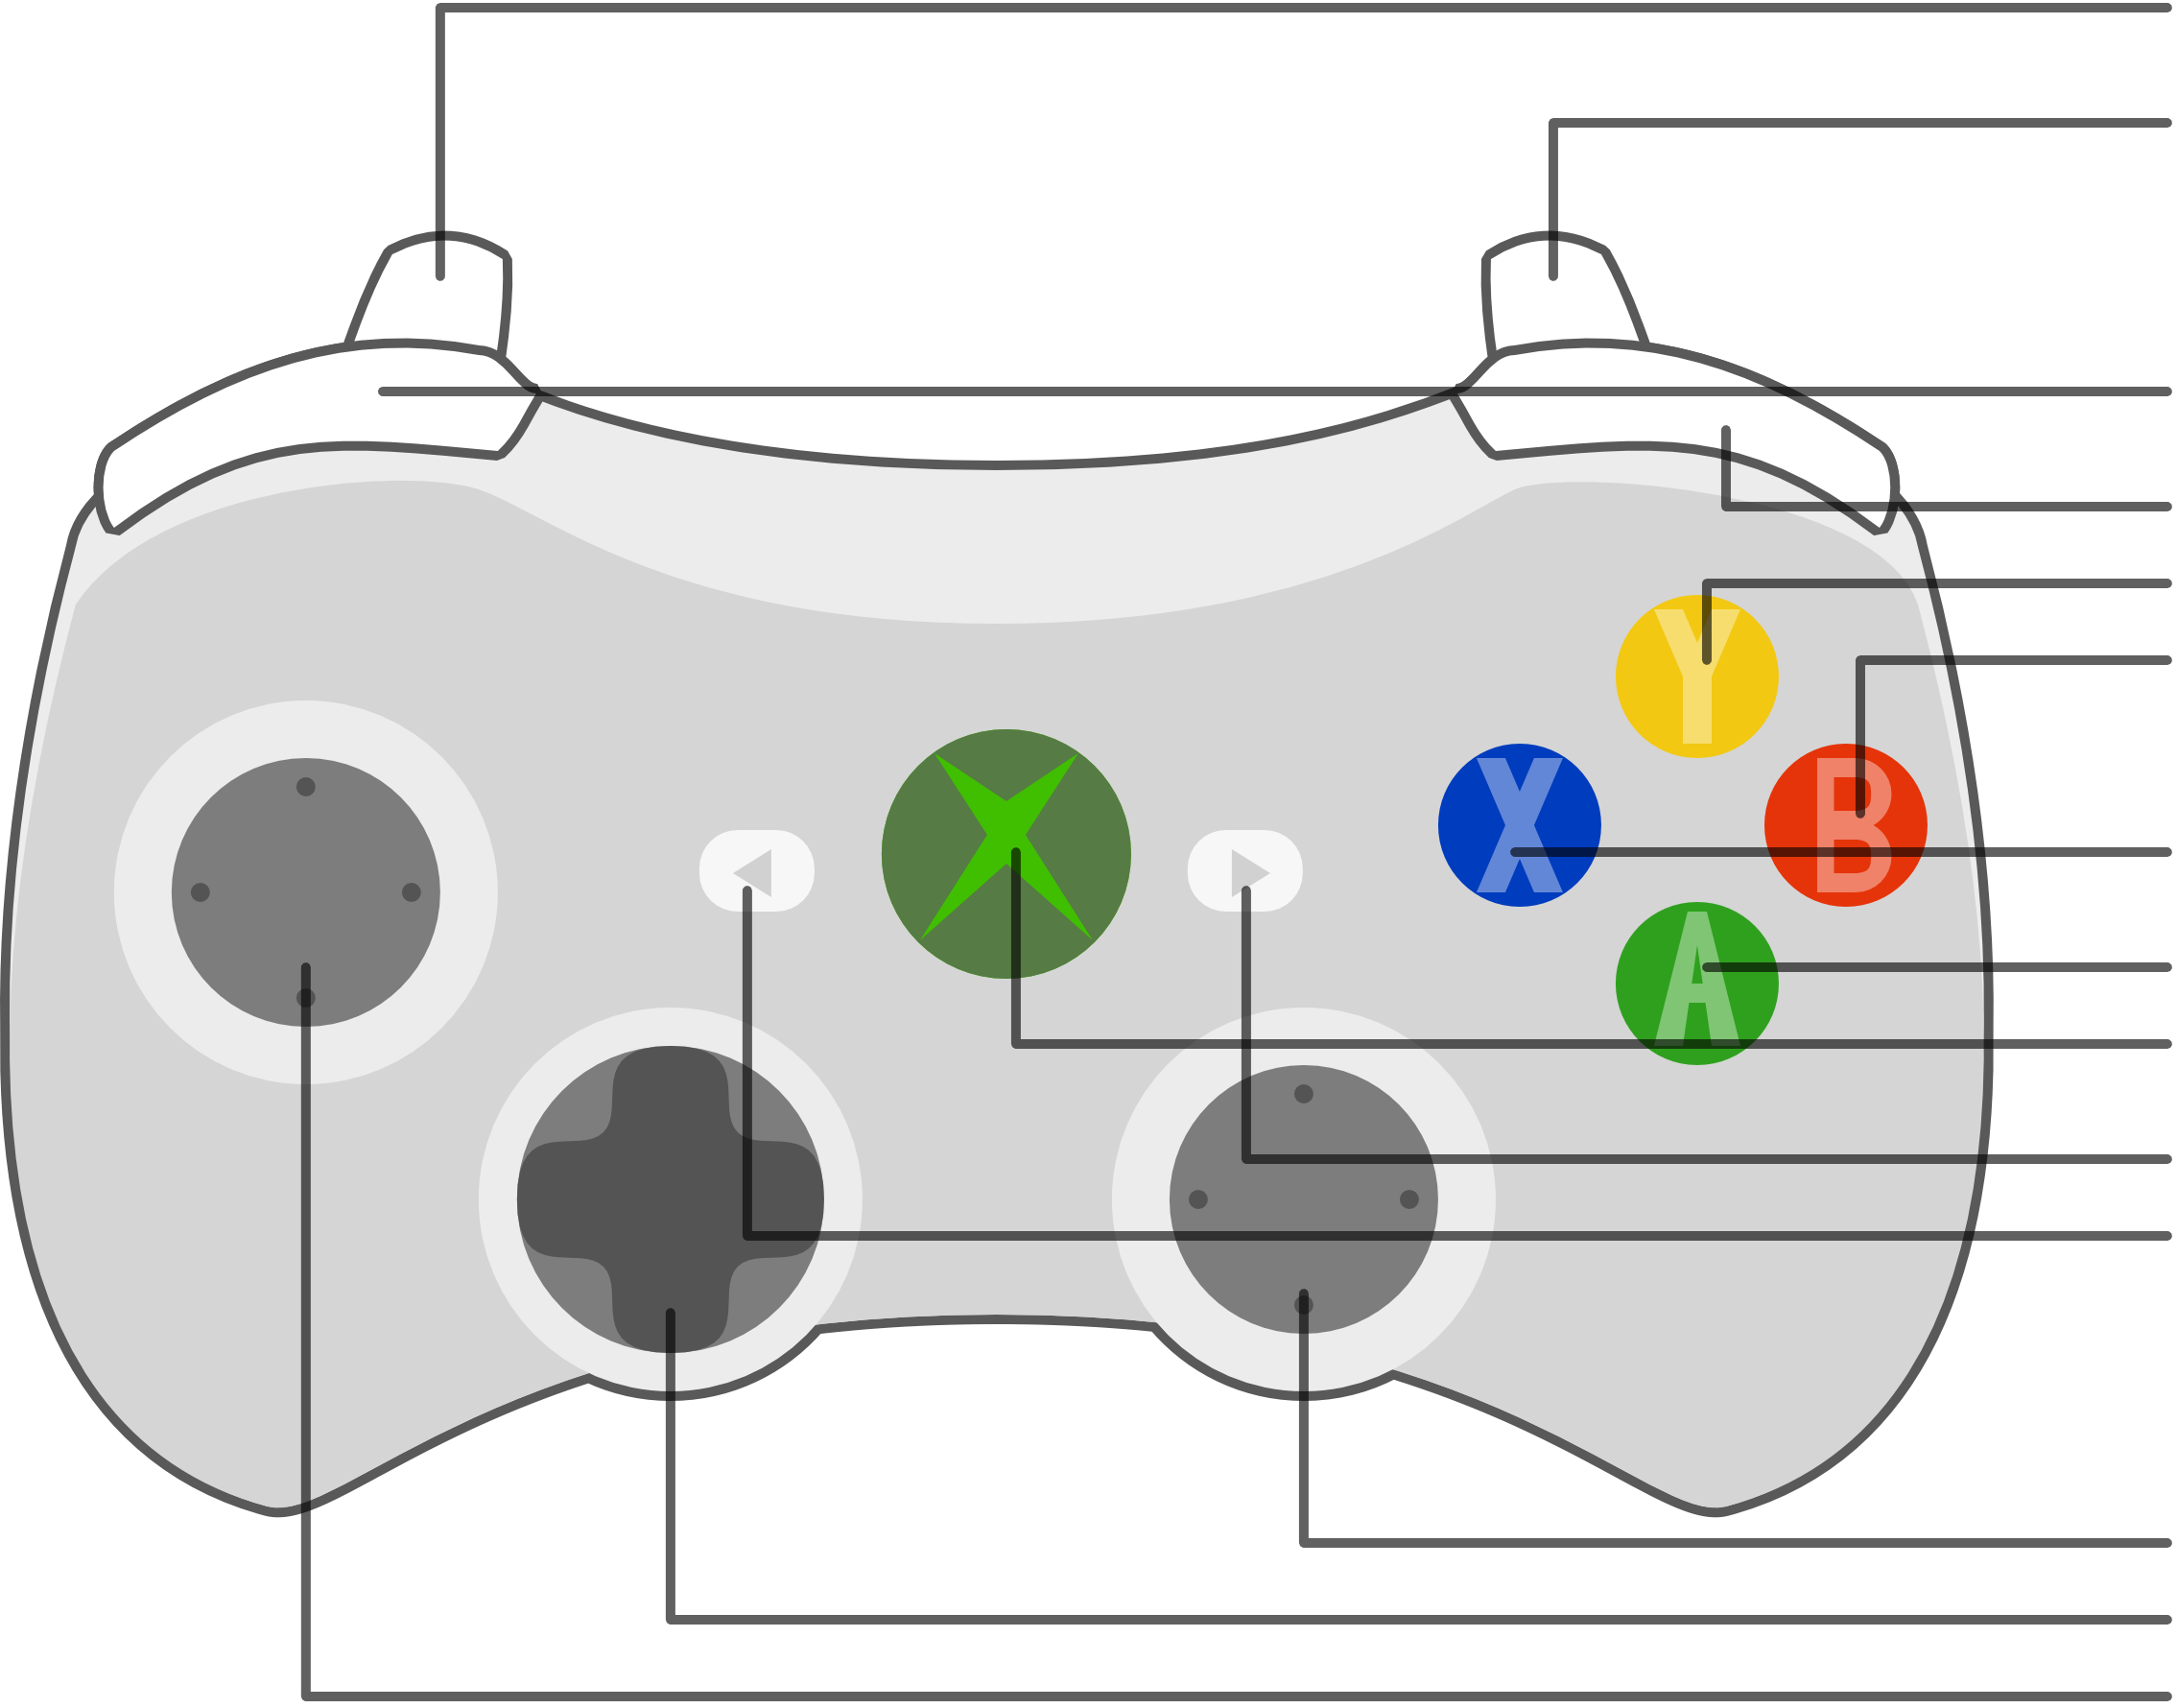 Xbox 360 Controller Control Scheme Diagram By Qubodup On